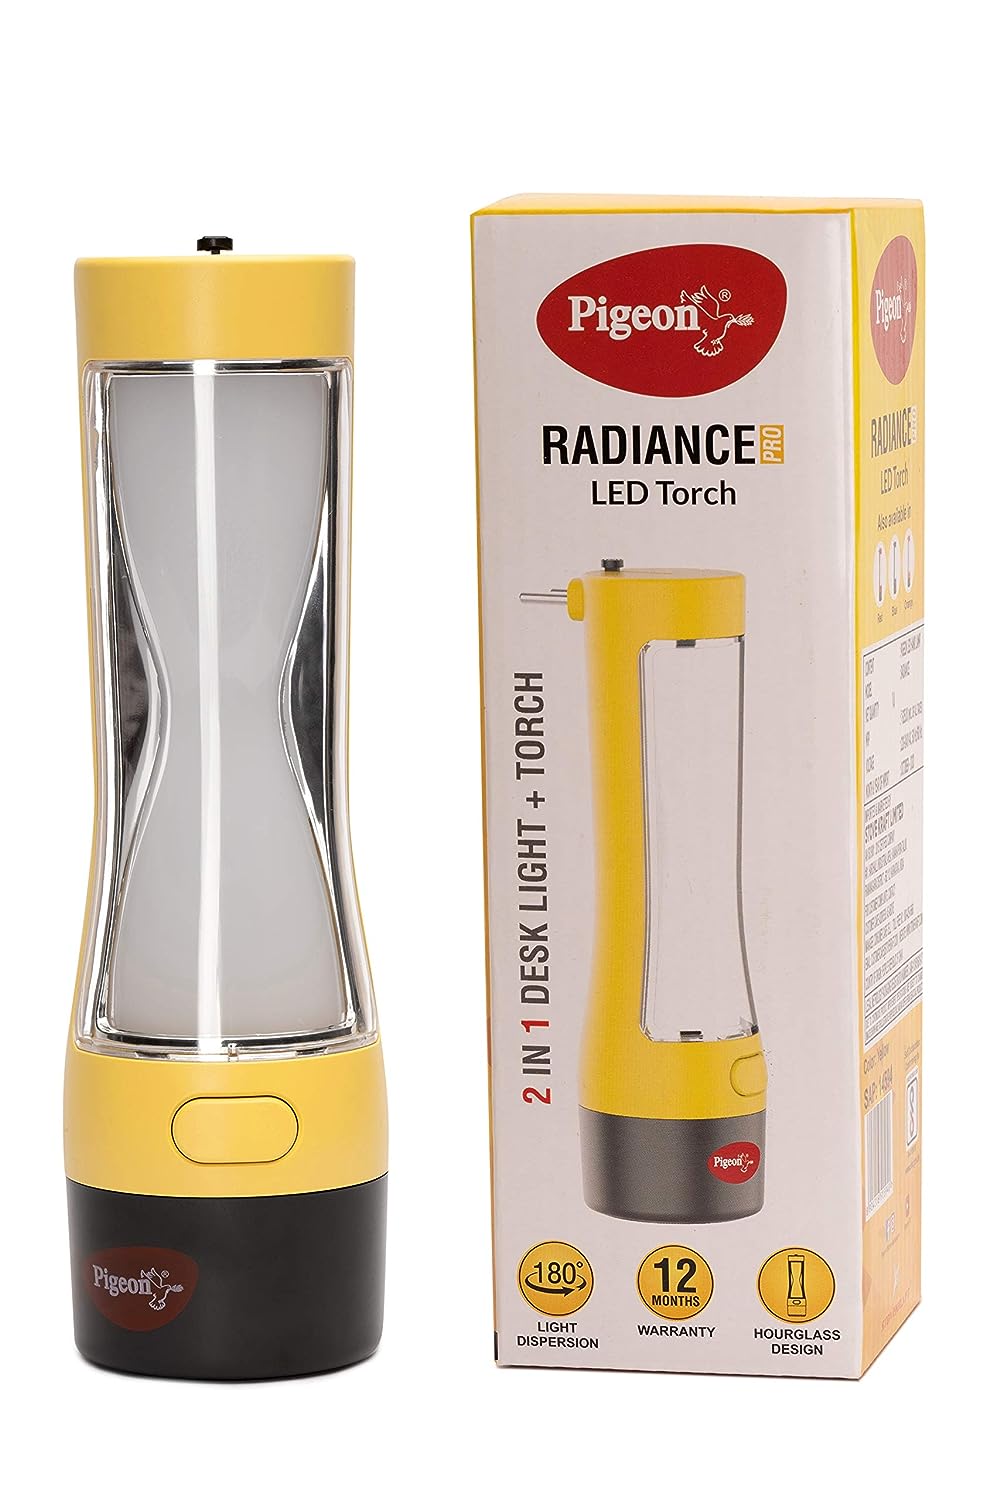 Pigeon Radiance Pro Desk + Torch Emergency Lamp with Battery 1200mAH, Yellow - 14594